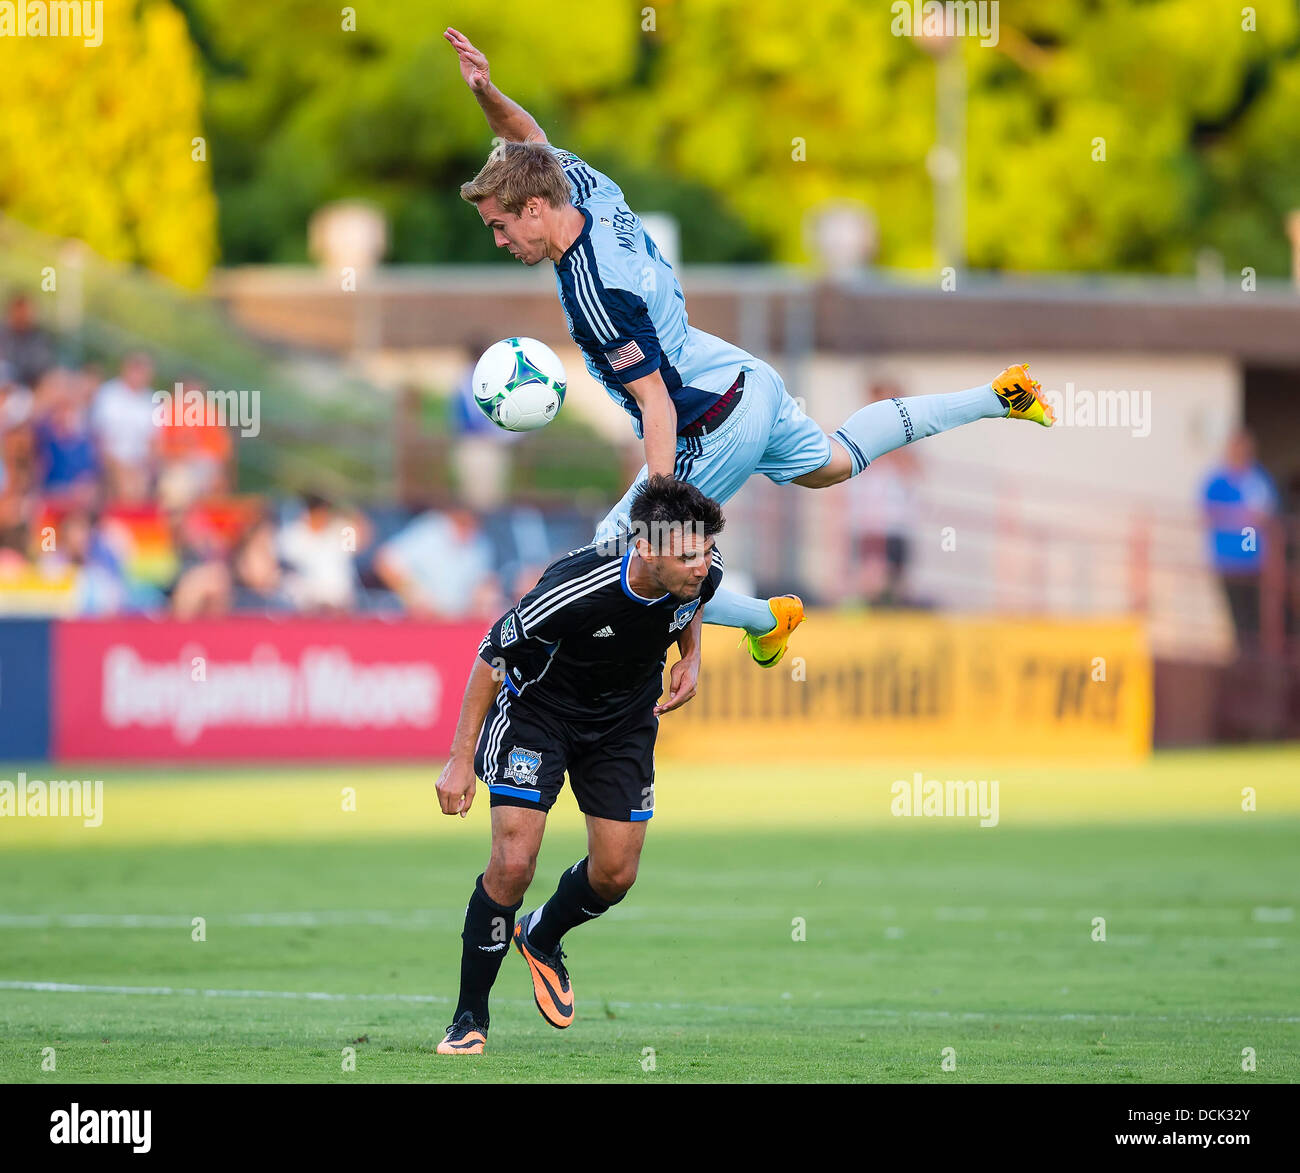 Santa Clara, CA. 18th Aug, 2013. August 18, 2013: Sporting KC defender Chance Myers (7) draws a yellow card for leaping on the back of San Jose Earthquakes forward Chris Wondolowski (8) during the MLS soccer game between the San Jose Earthquakes and Sporting Kansas City at Buck Shaw Stadium in Santa Clara, CA. The Earthquakes defeated Kansas City 1-0. © Cal Sport Media/Alamy Live News Stock Photo